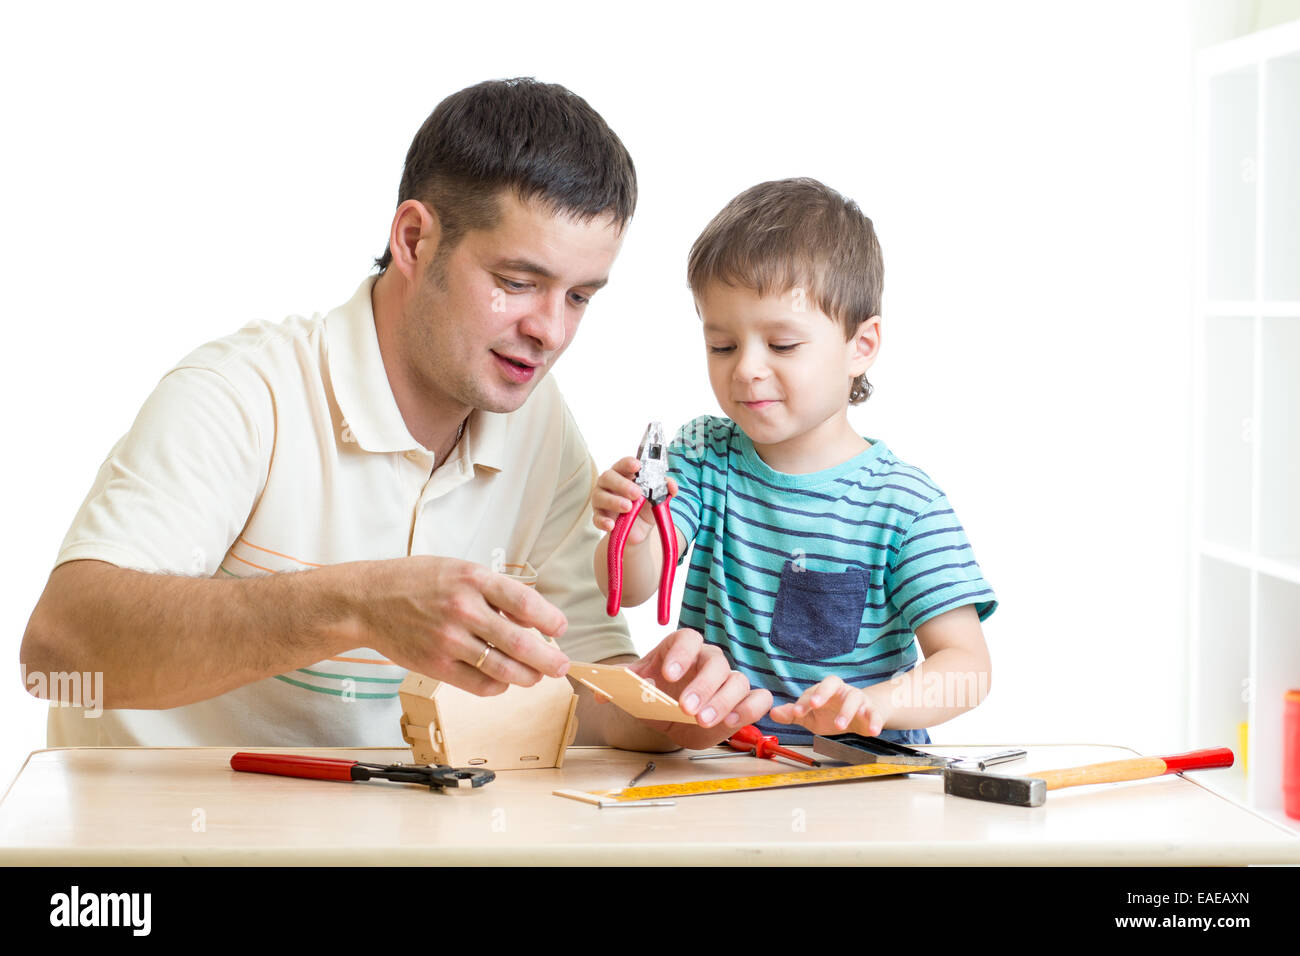 Dad and son child working with tools together Stock Photo